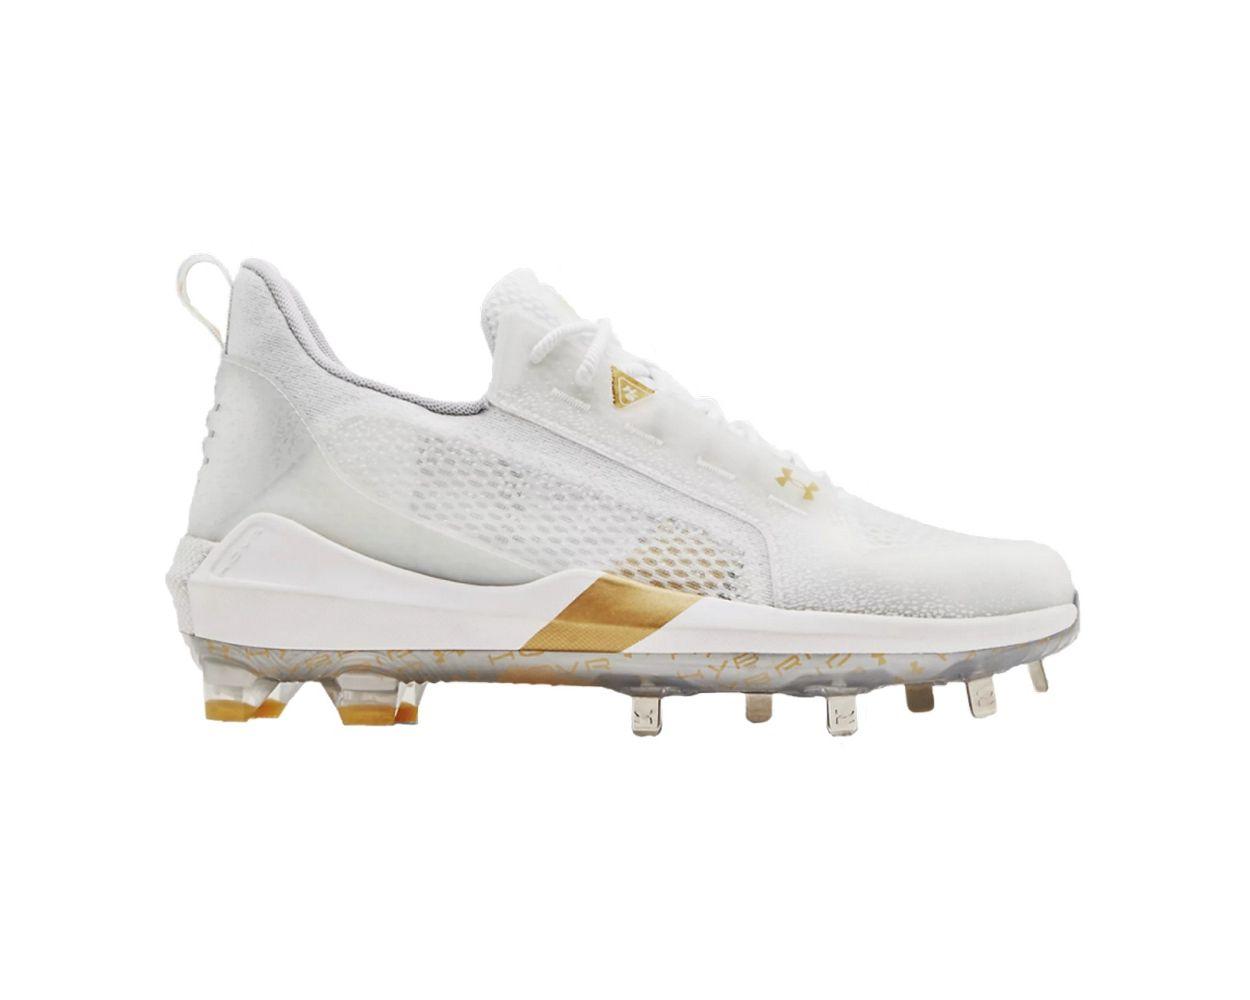 Under Armour Bryce Harper Cleats 6